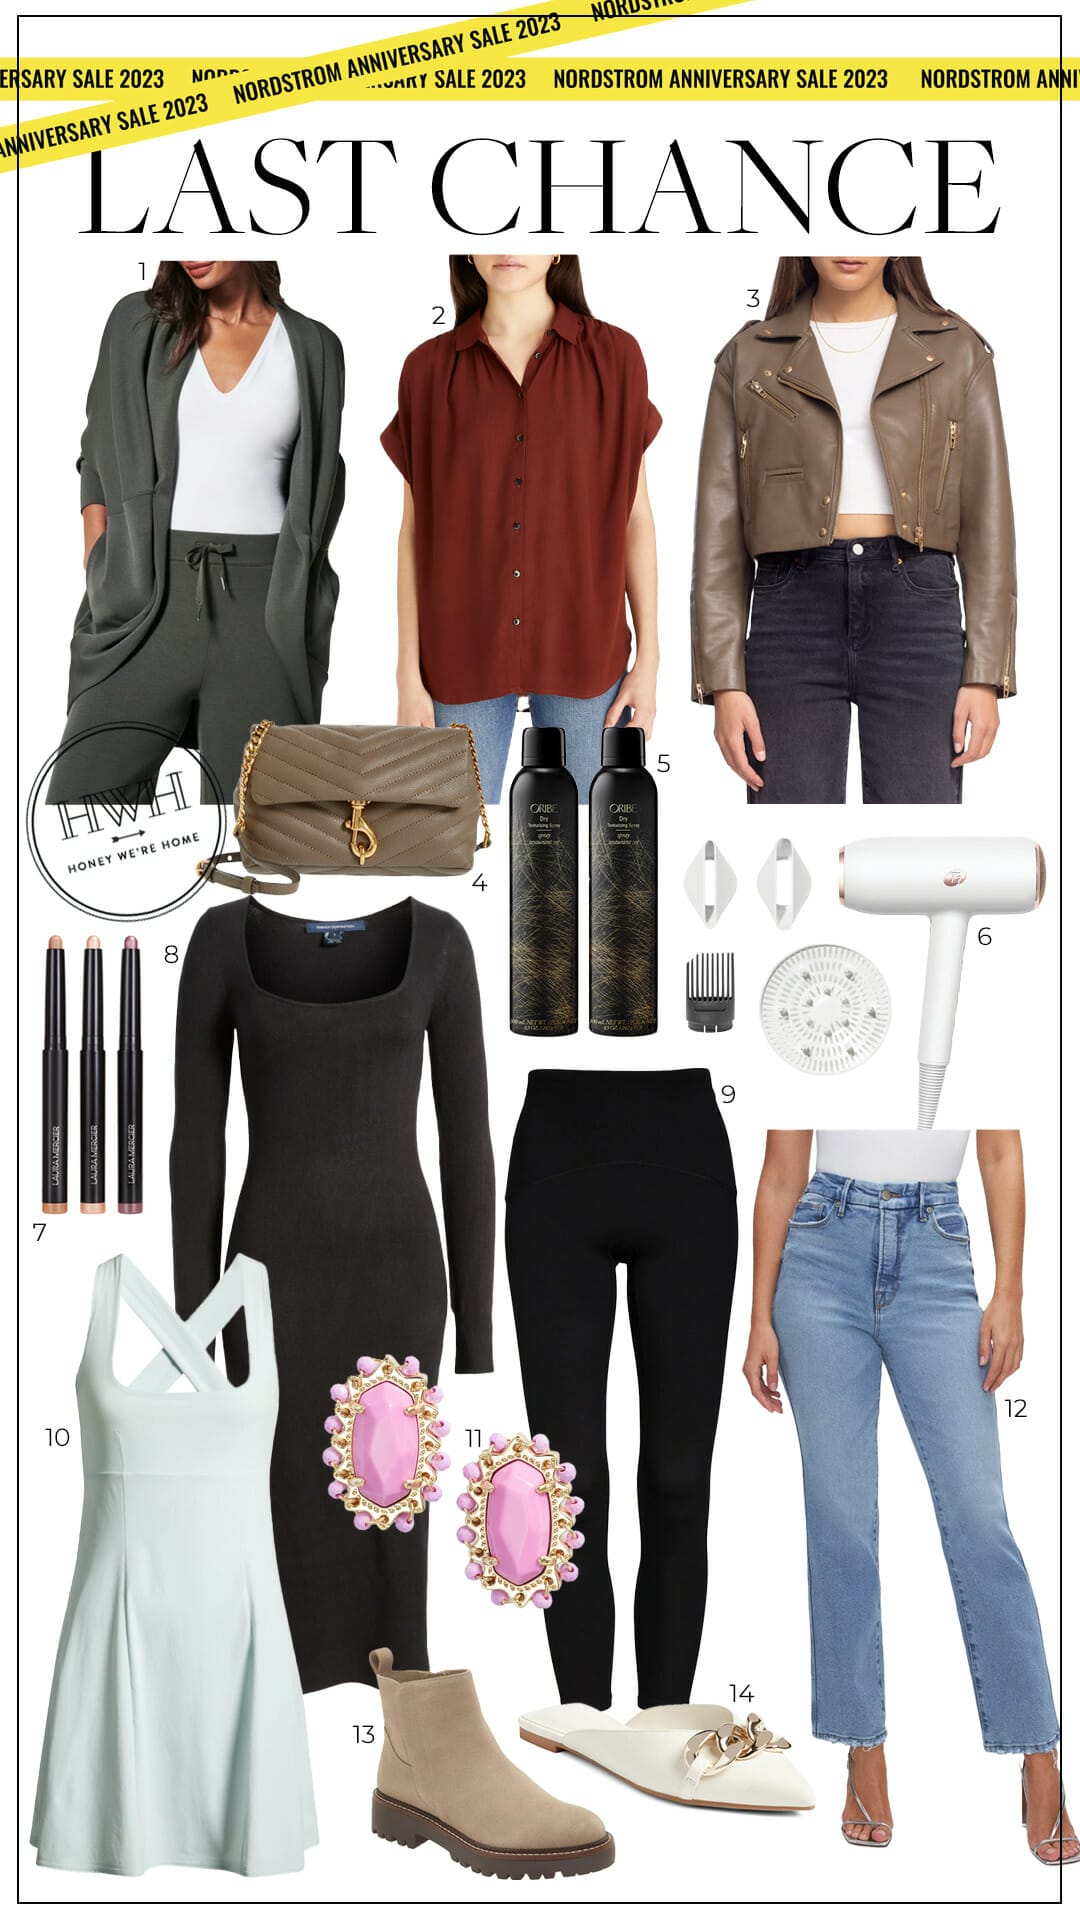 NSALE 2023 Outfit Ideas: 10 Fall Looks Ft. EILEEN FISHER - The Mom